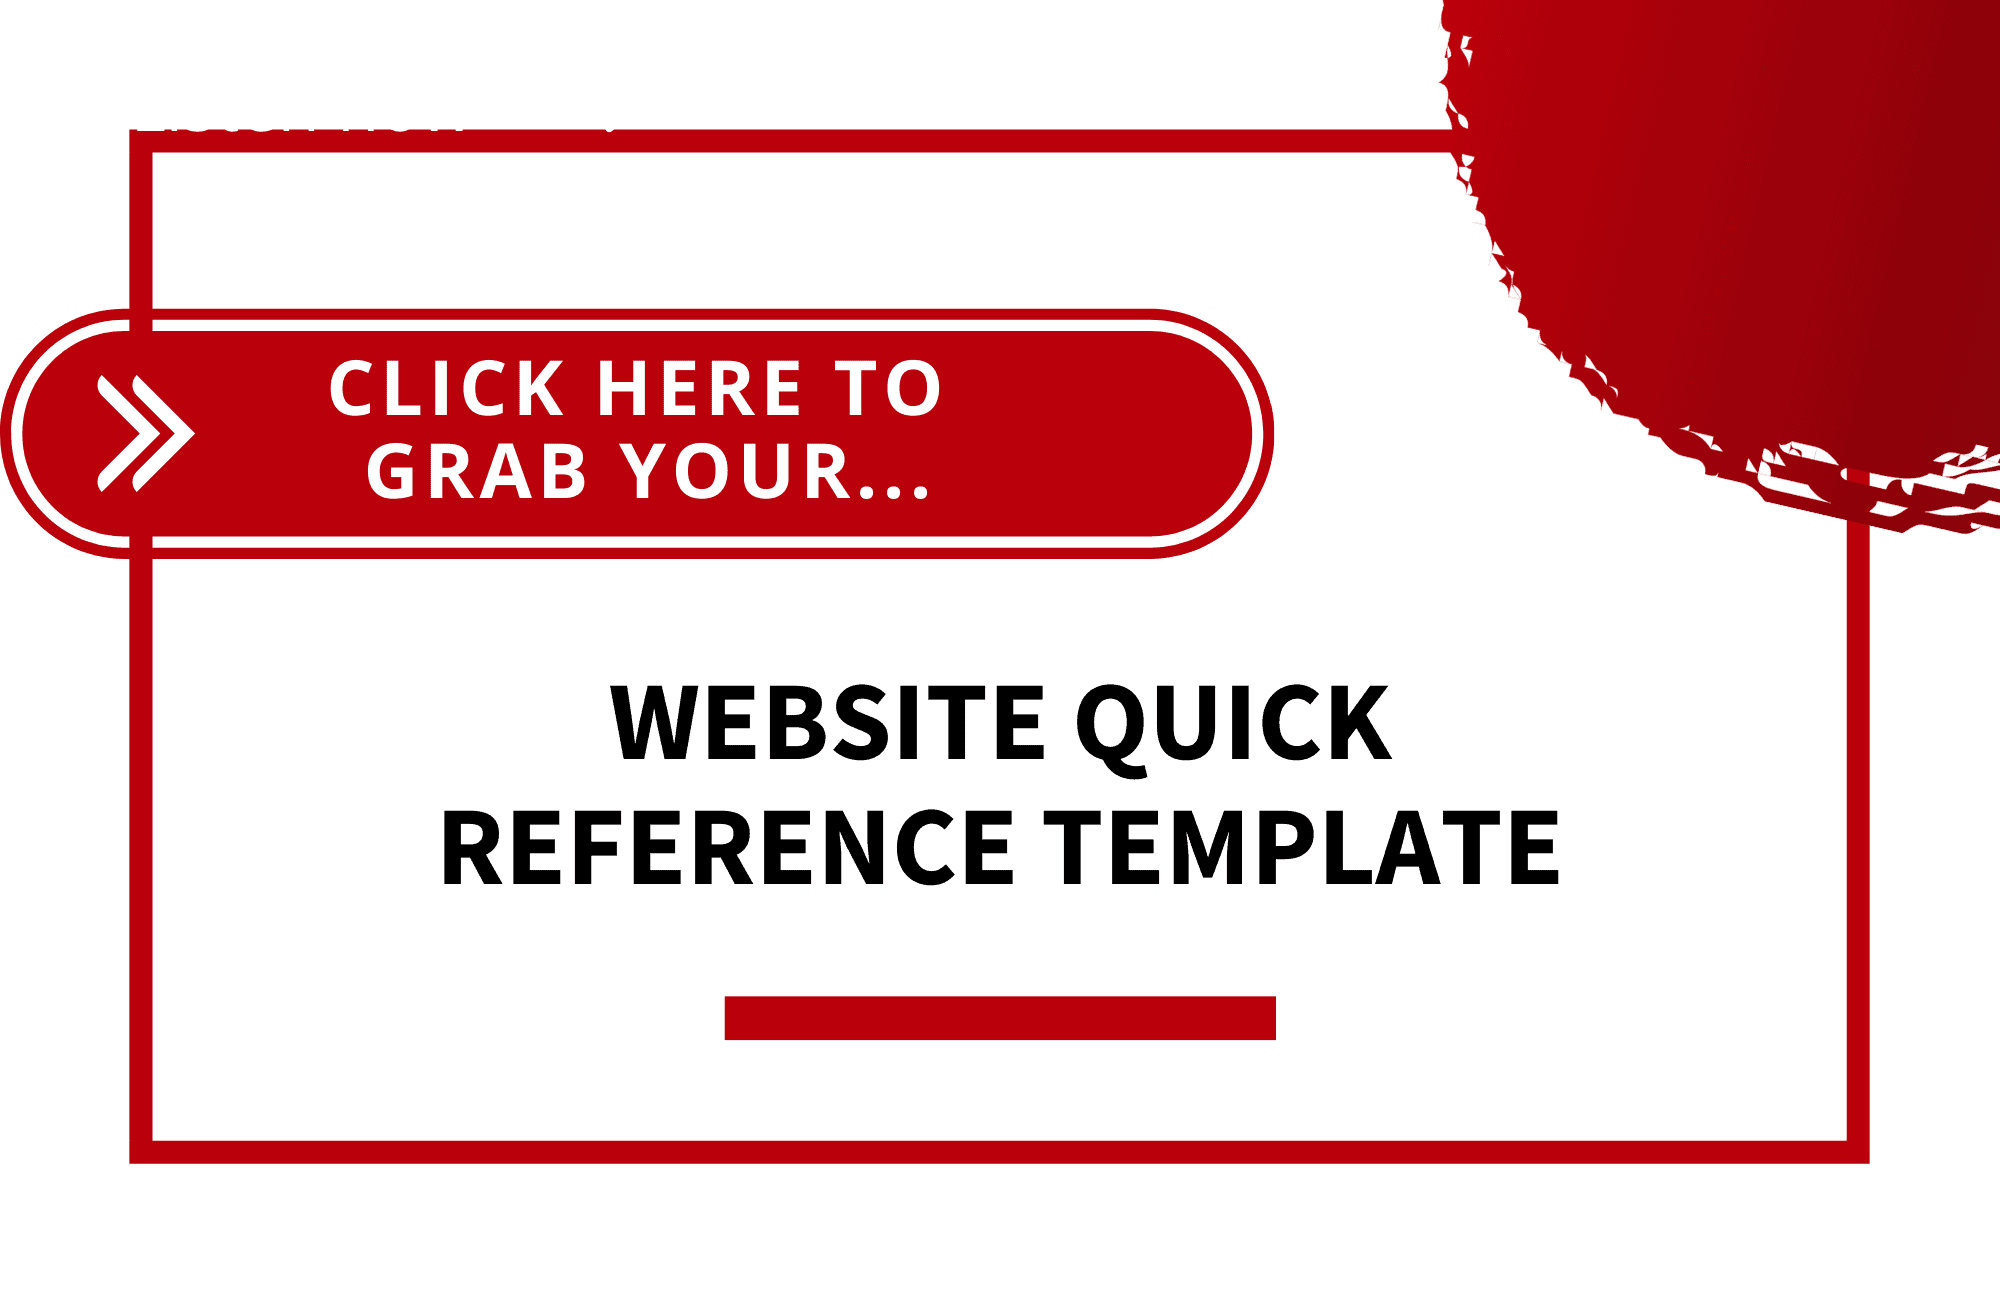 Grab Your Website Quick Reference Template